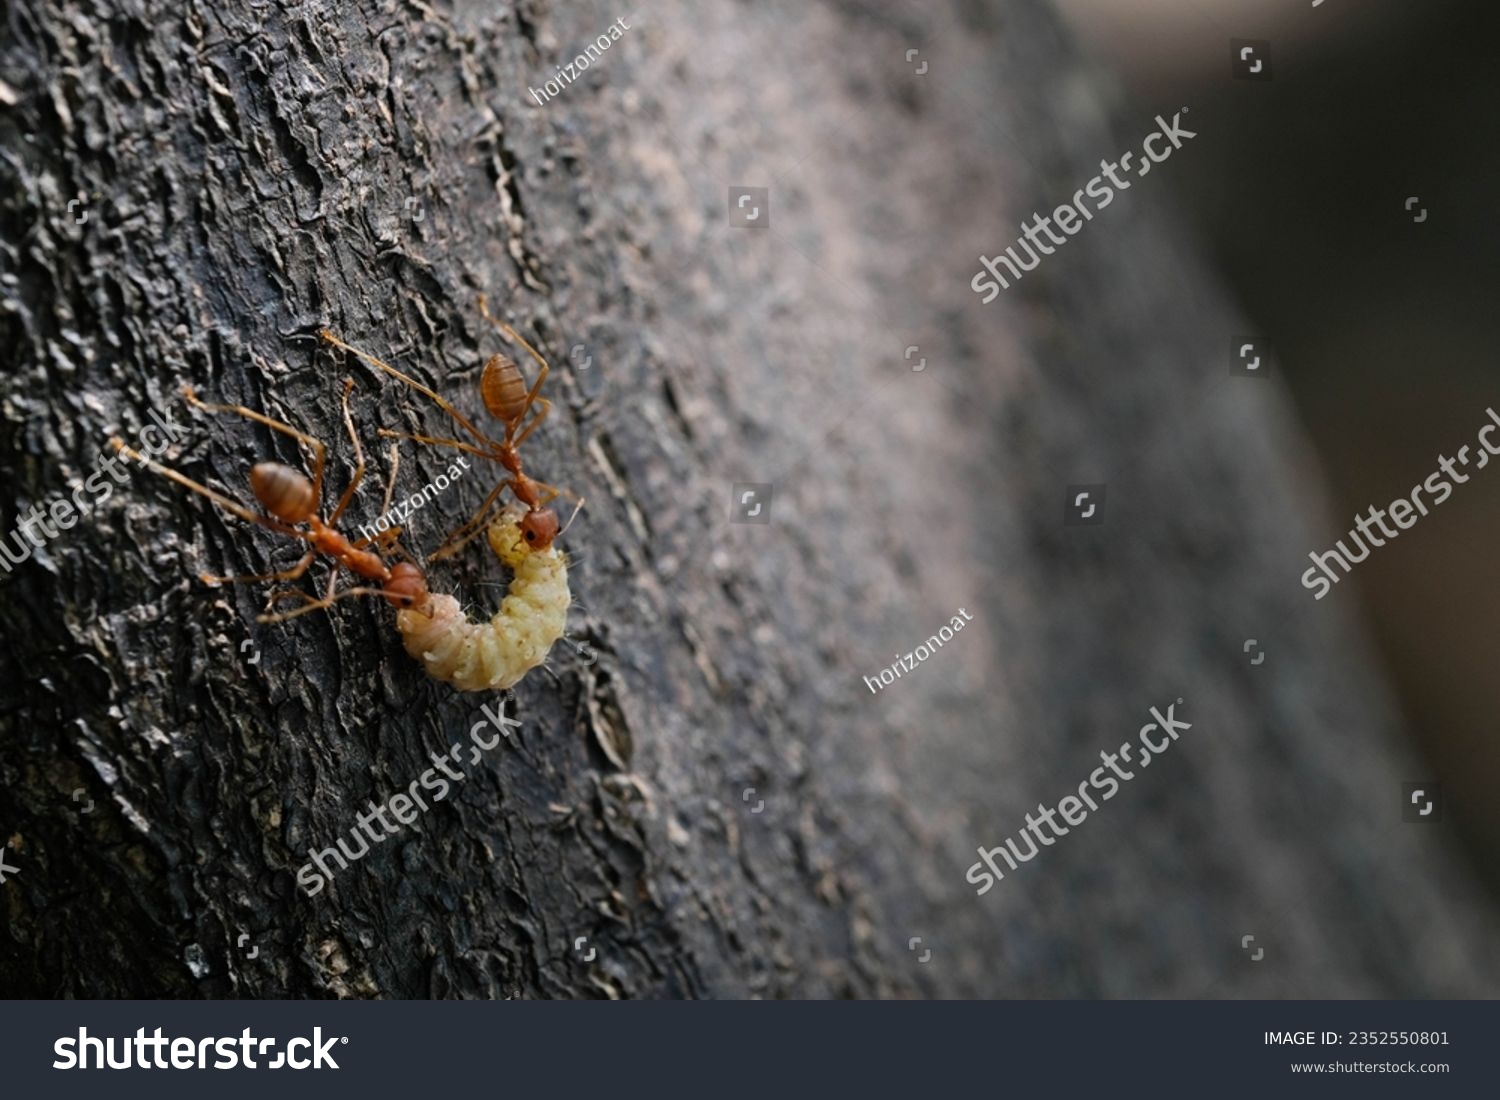 Ants hunt worm as a team. #2352550801